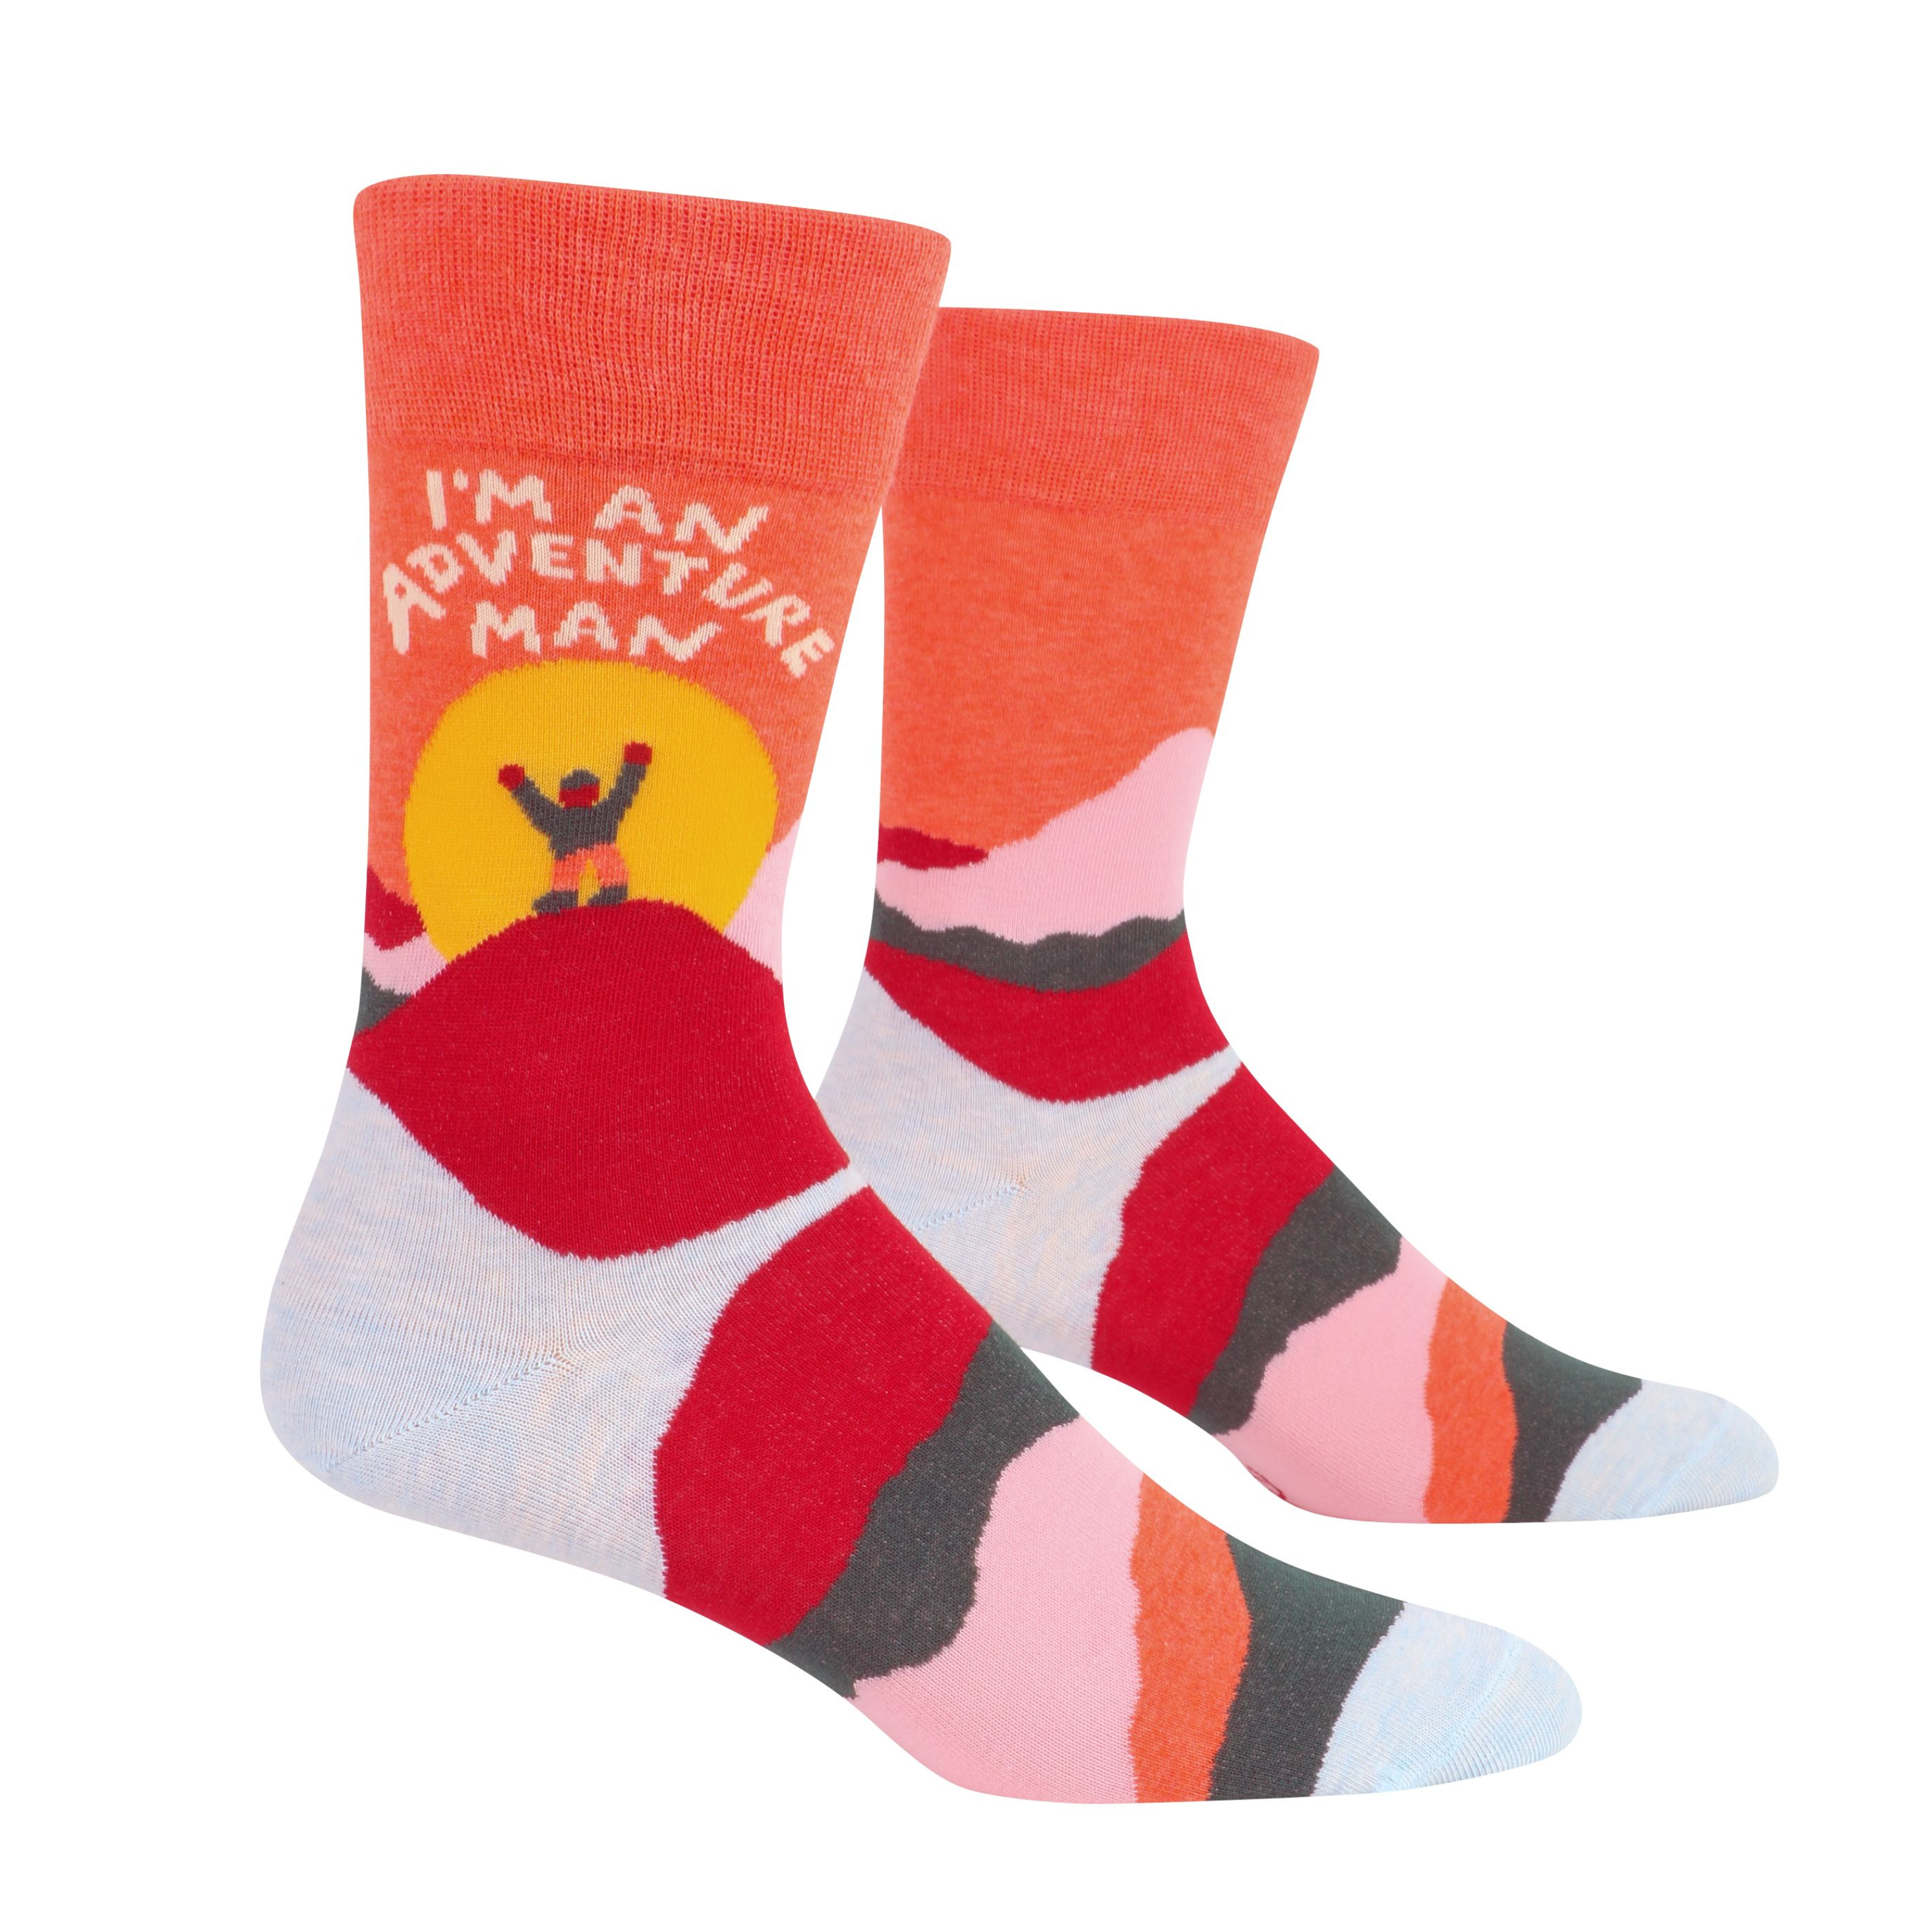 warm toned multicolour socks that show a sunrise with a person on top of hill with sun in behind and it says i'm an adventure man